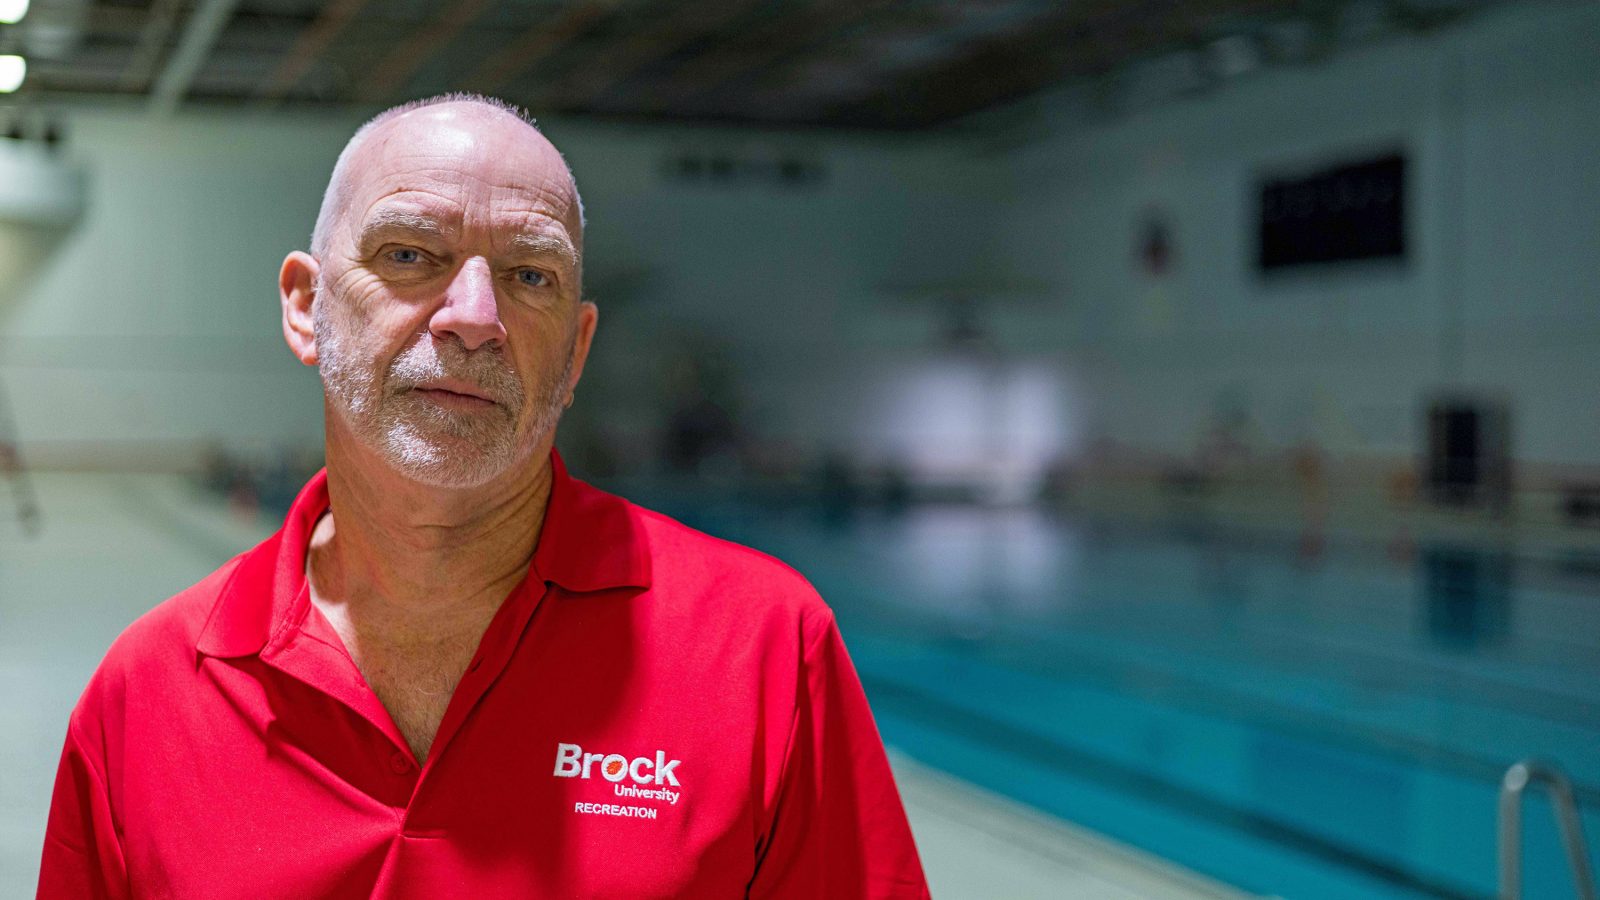 A man in a red Brock University shirt stands beside a pool.